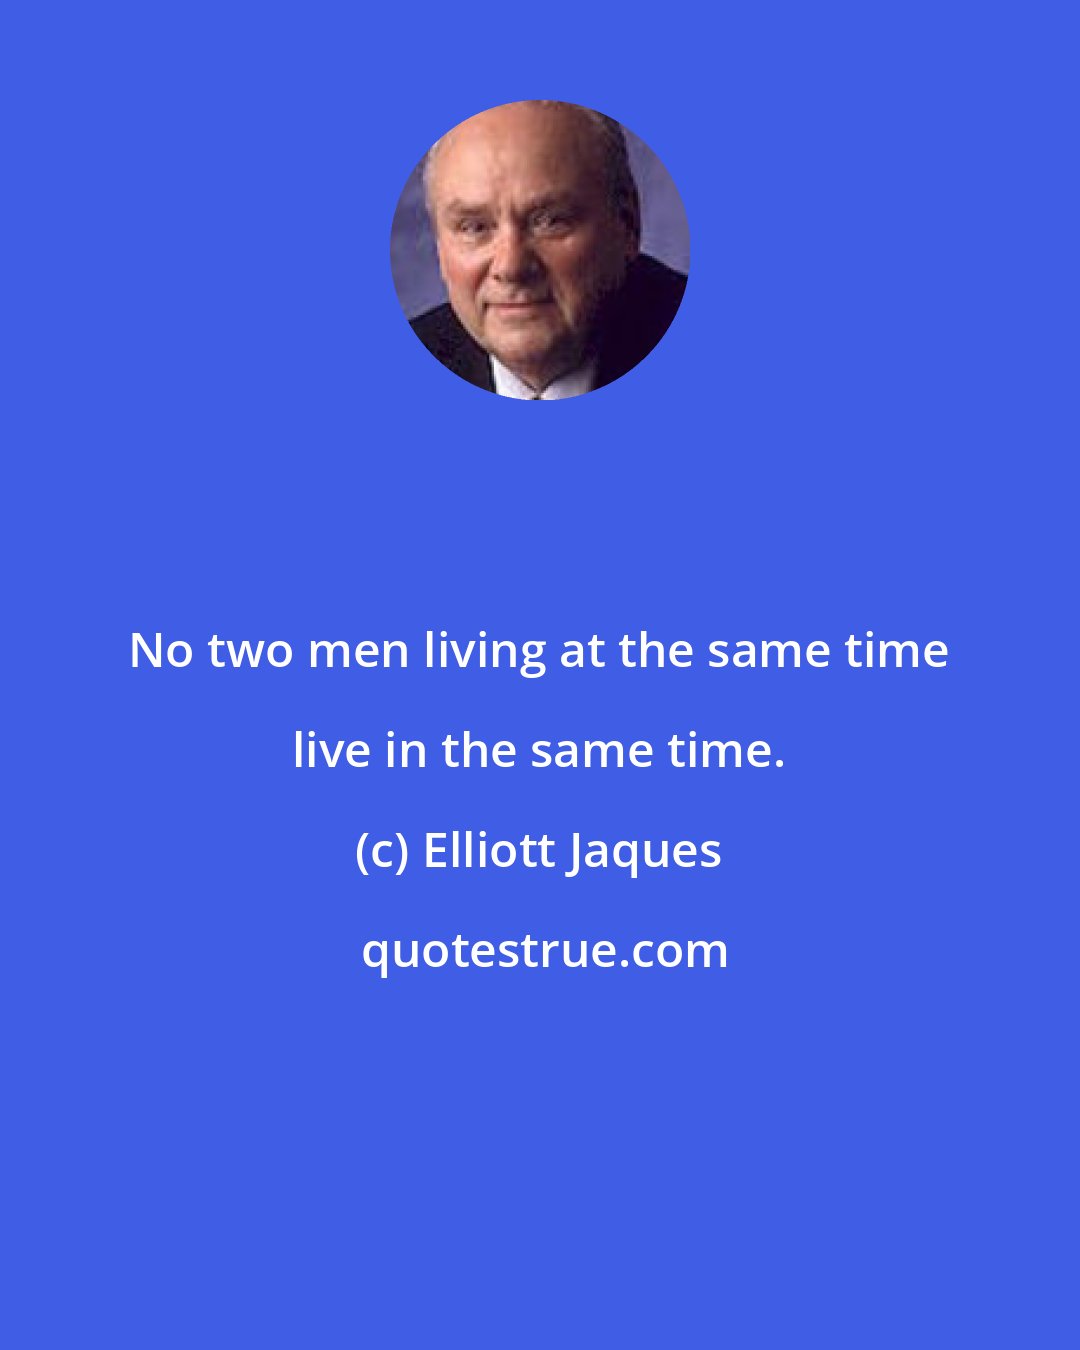 Elliott Jaques: No two men living at the same time live in the same time.